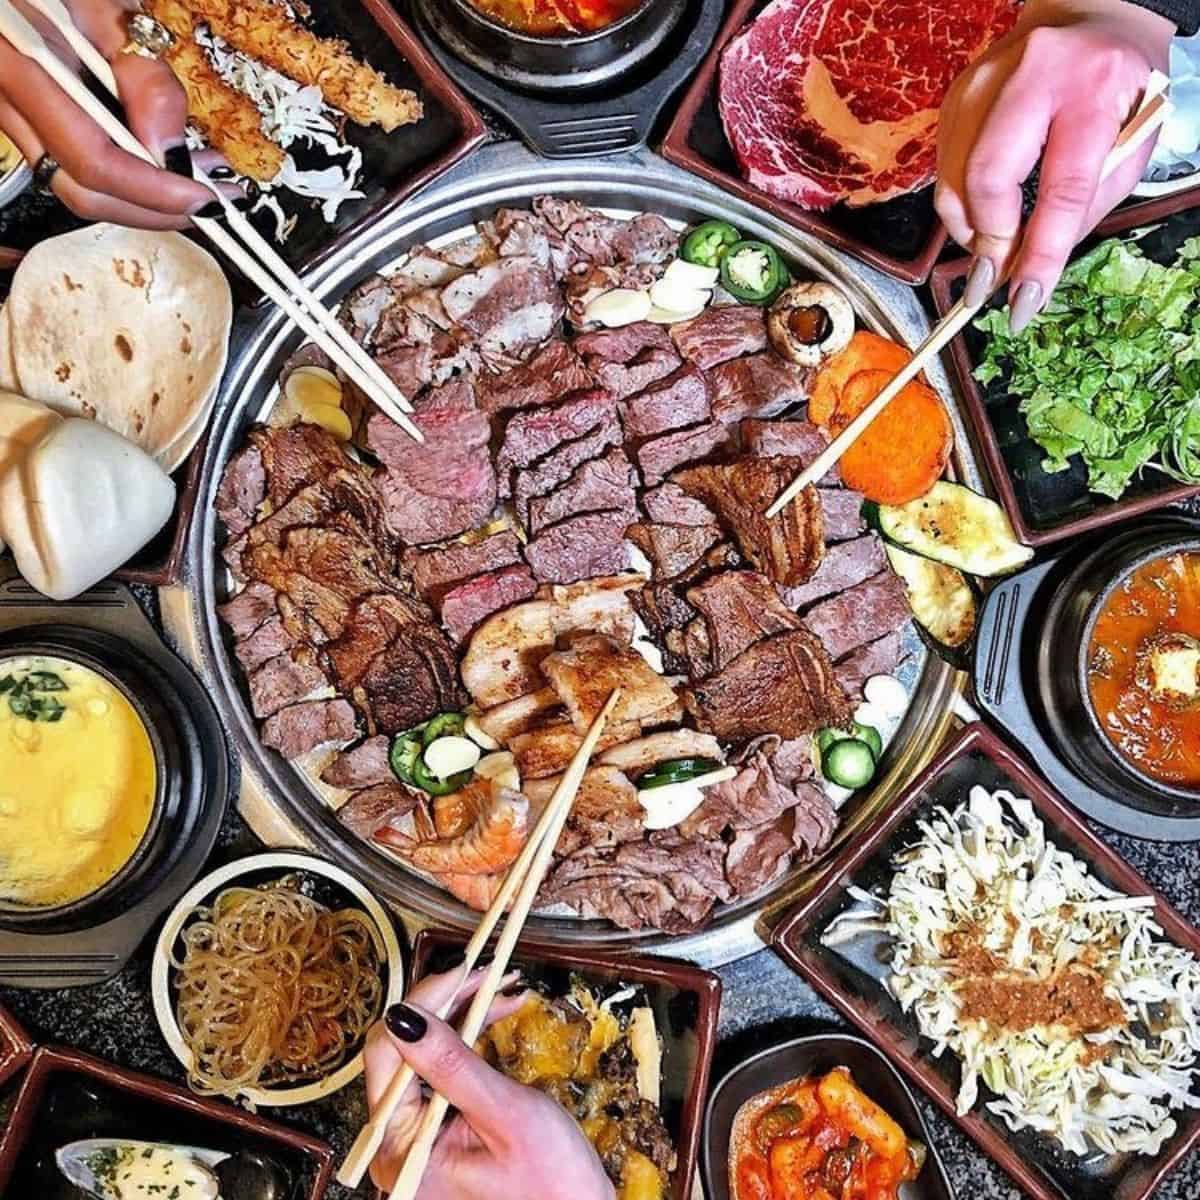 Korean Bbq Guide At Restaurants And Home Grilling